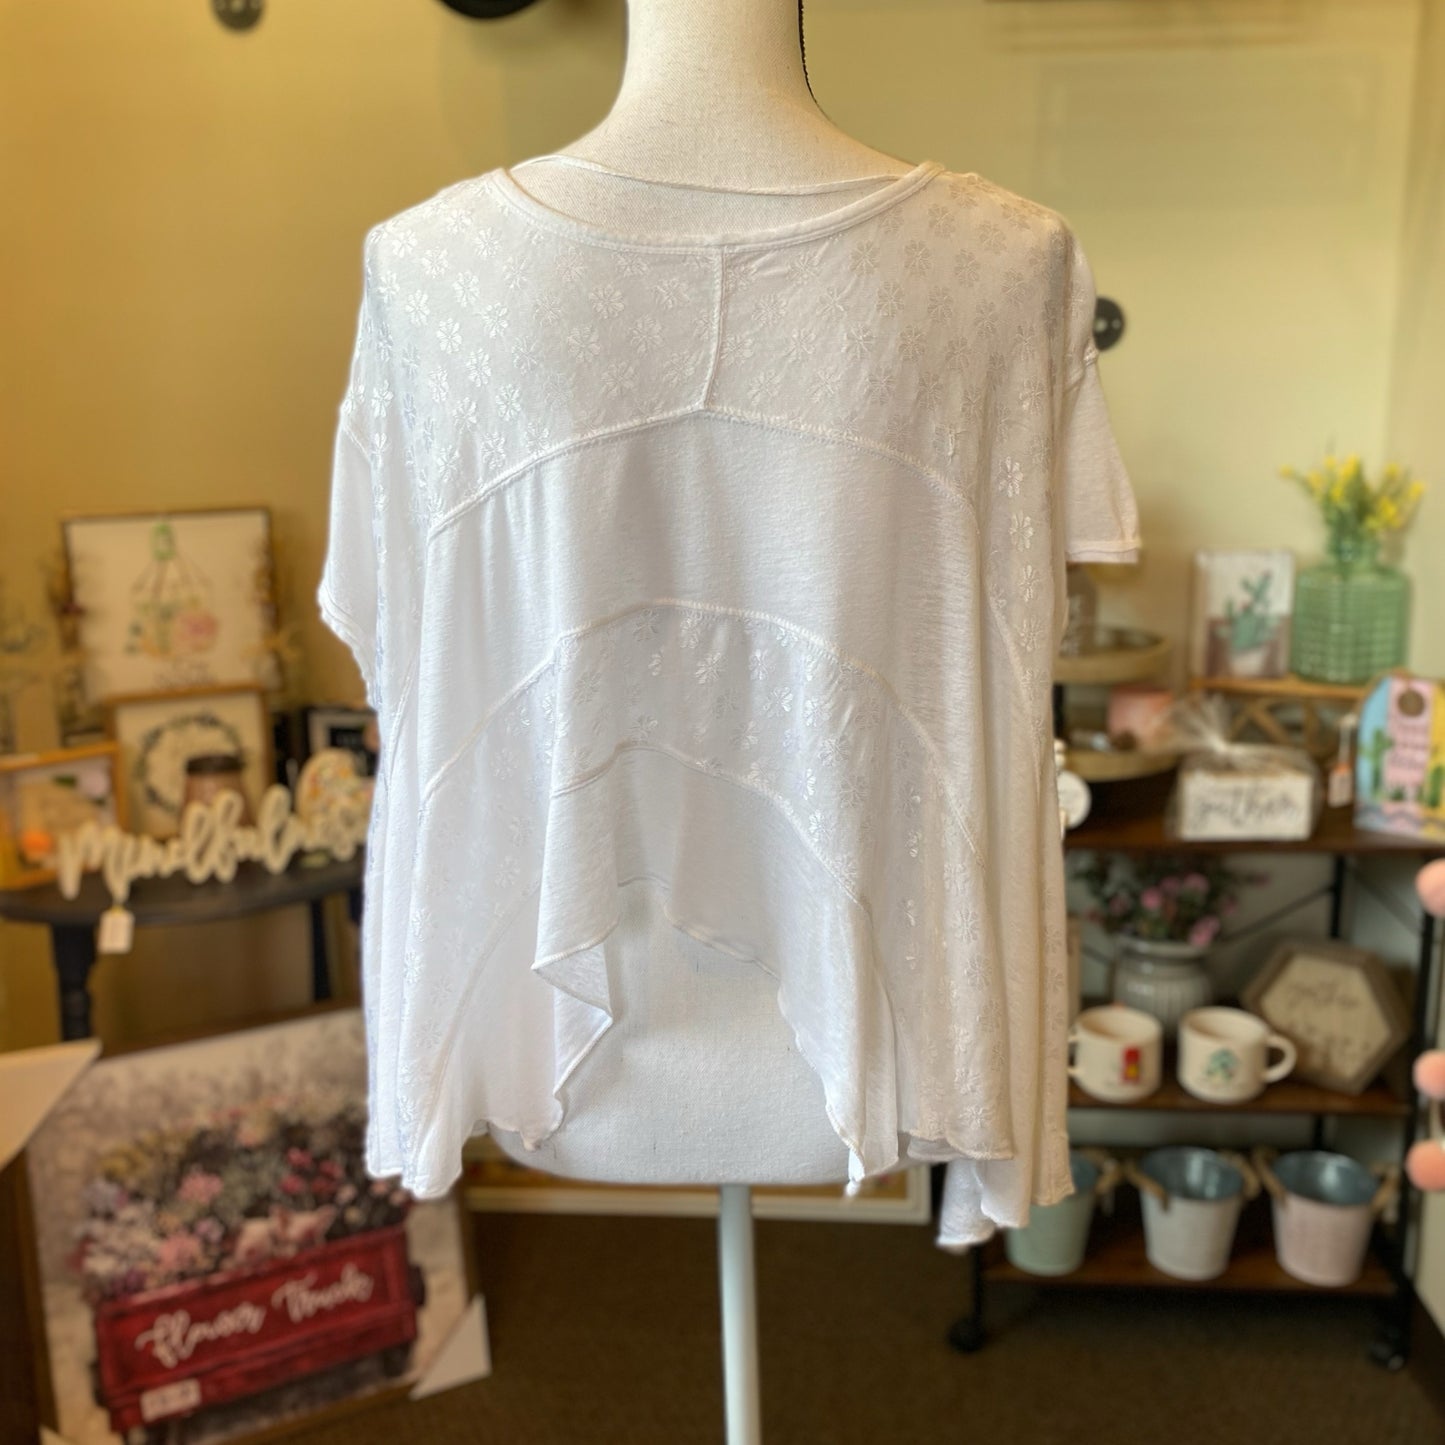 Free People Top - Size Small